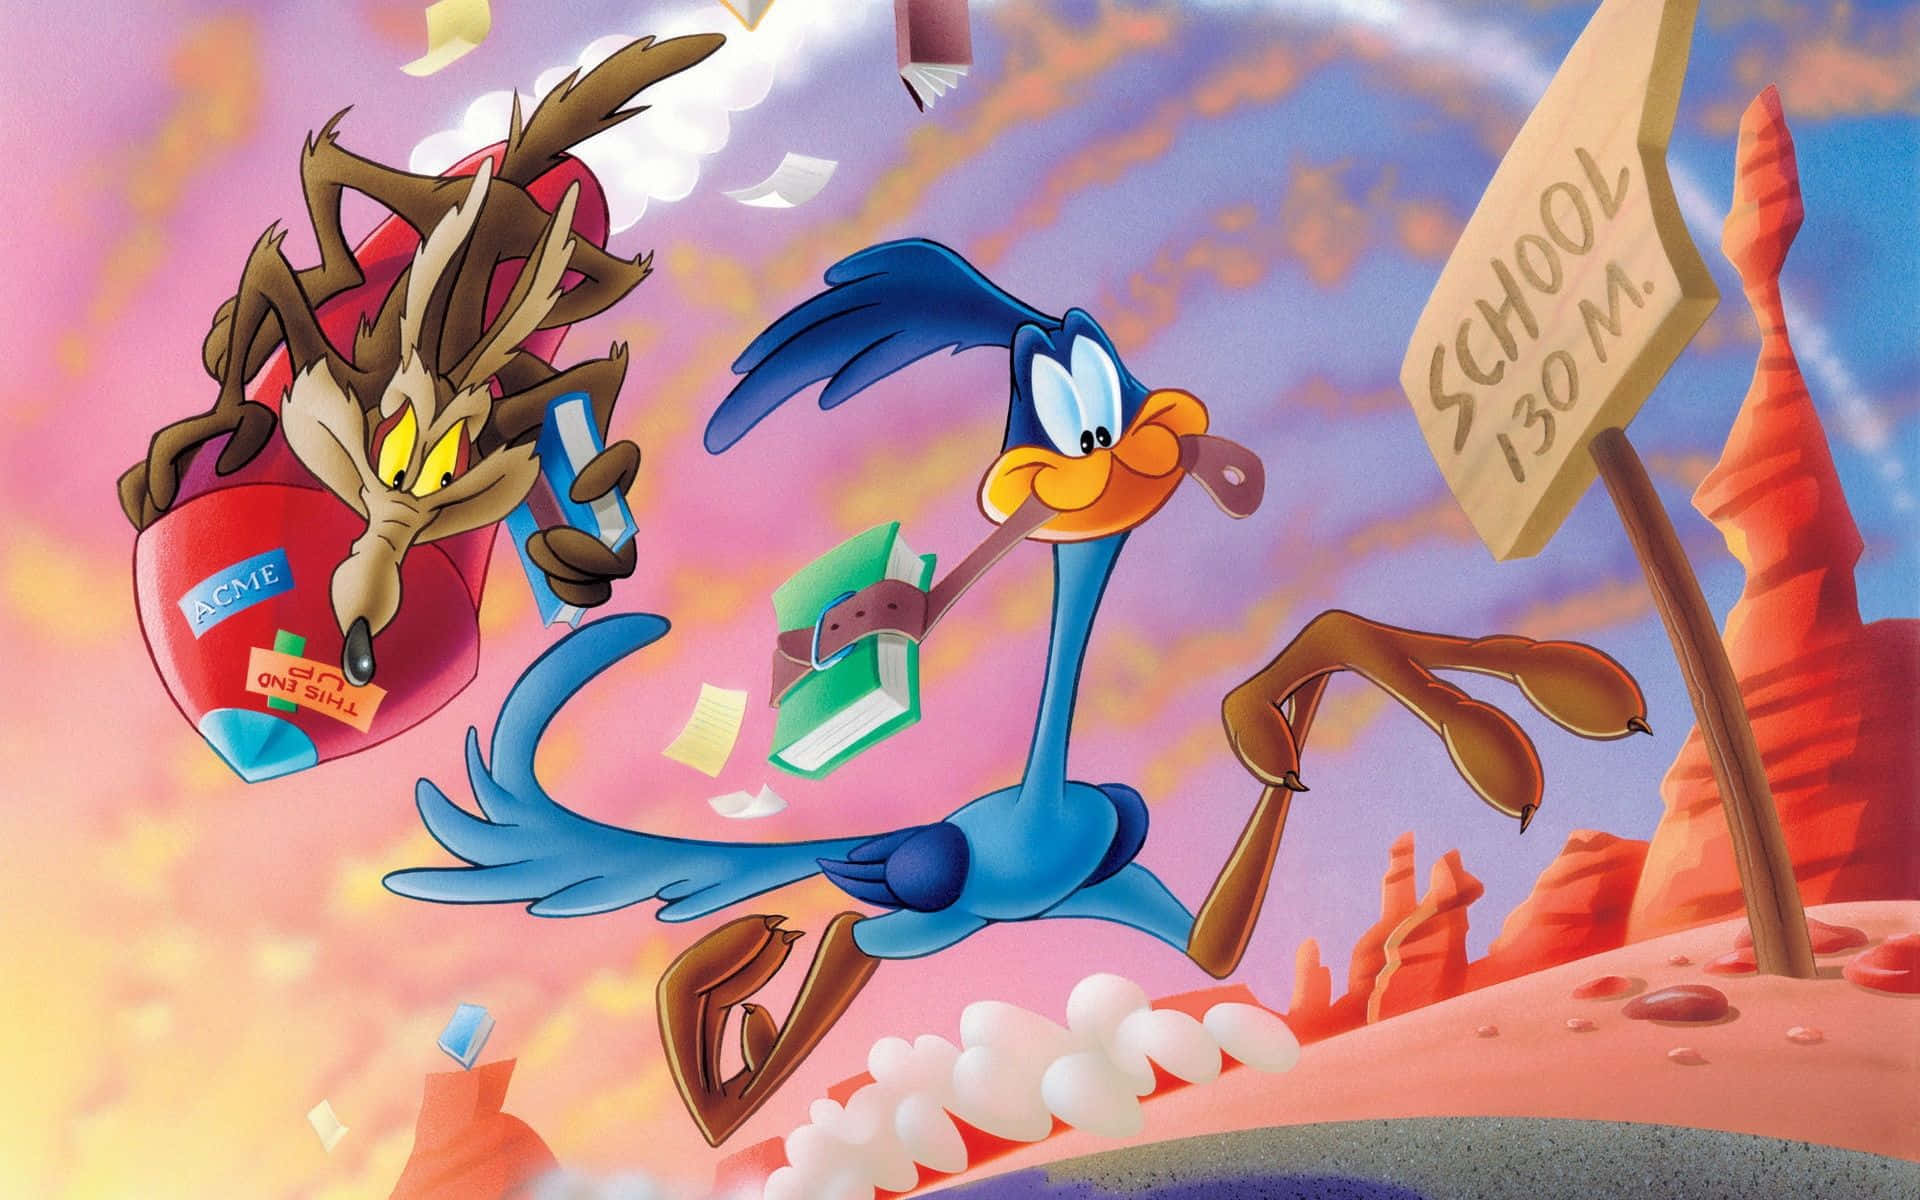 Wile E. Coyote And Road Runner Background